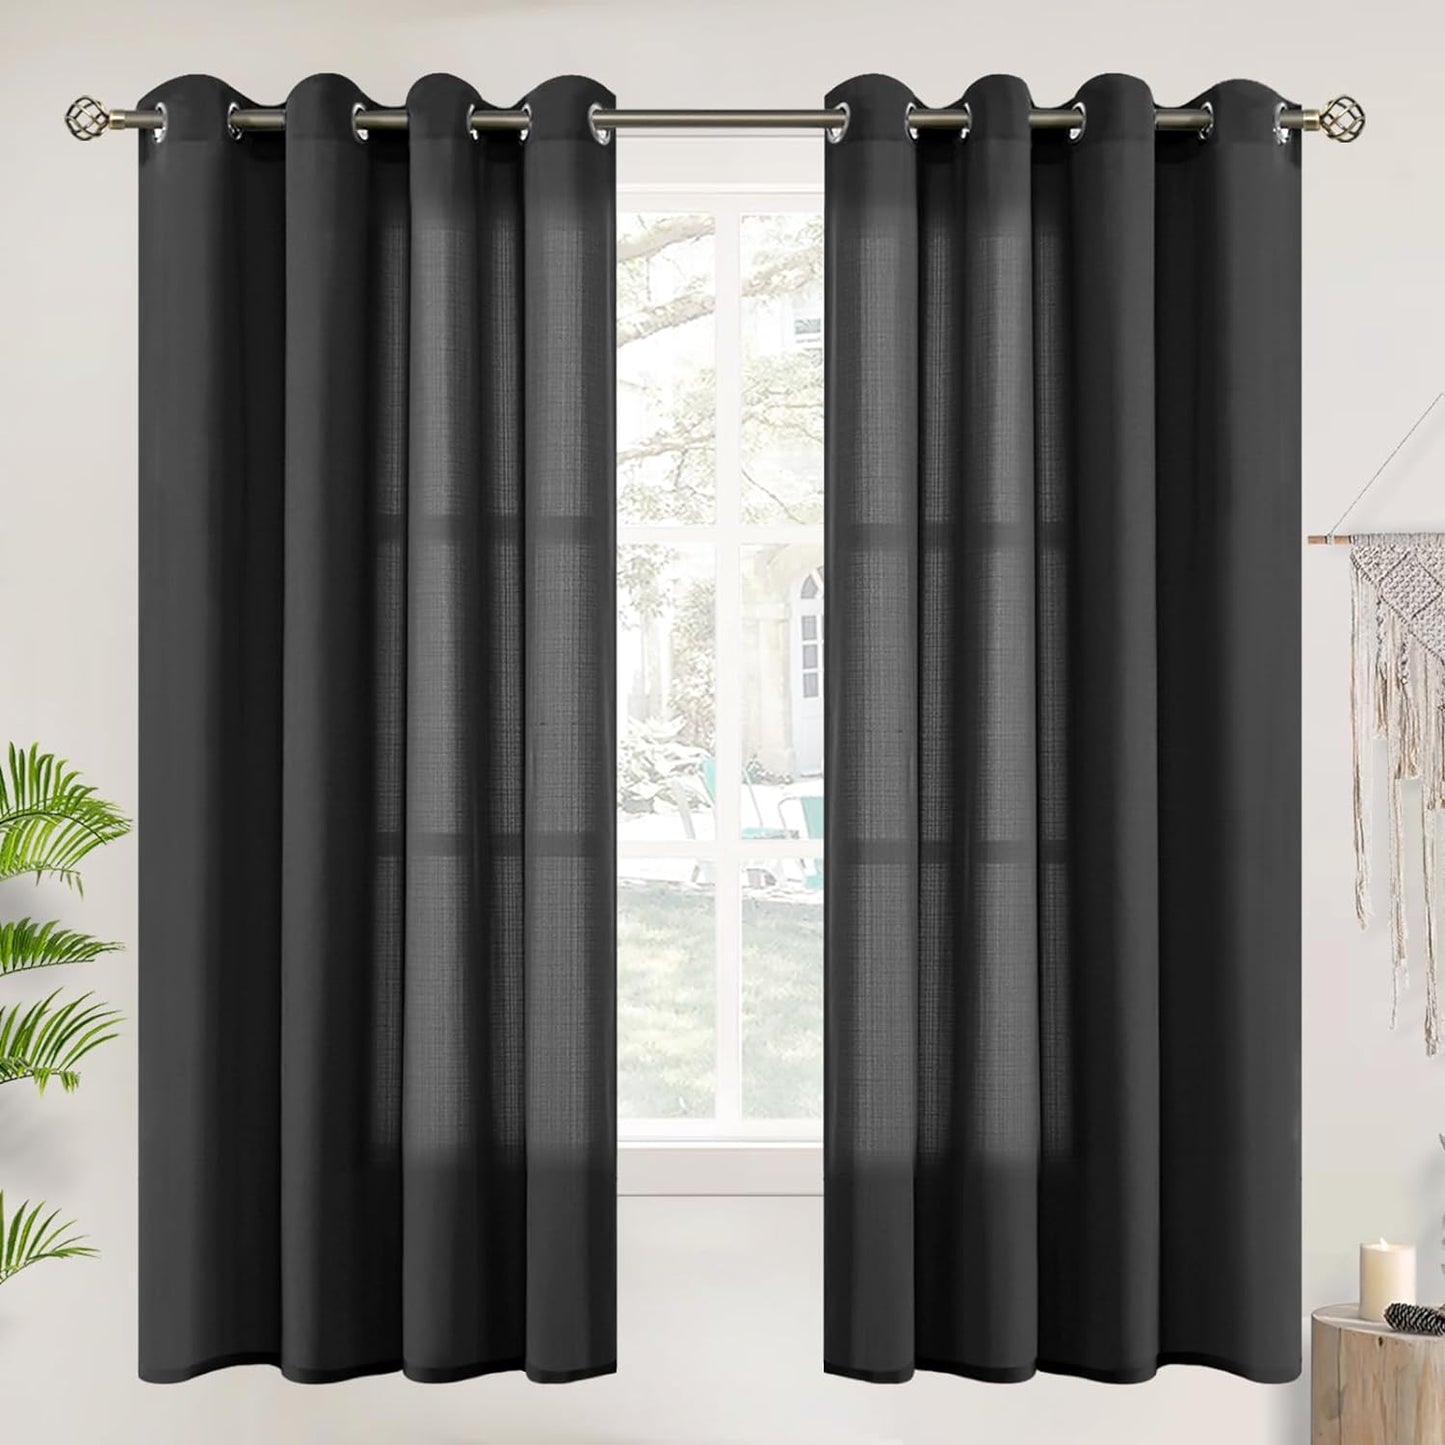 Bgment Natural Linen Look Semi Sheer Curtains for Bedroom, 52 X 54 Inch White Grommet Light Filtering Casual Textured Privacy Curtains for Bay Window, 2 Panels  BGment Black 52W X 63L 